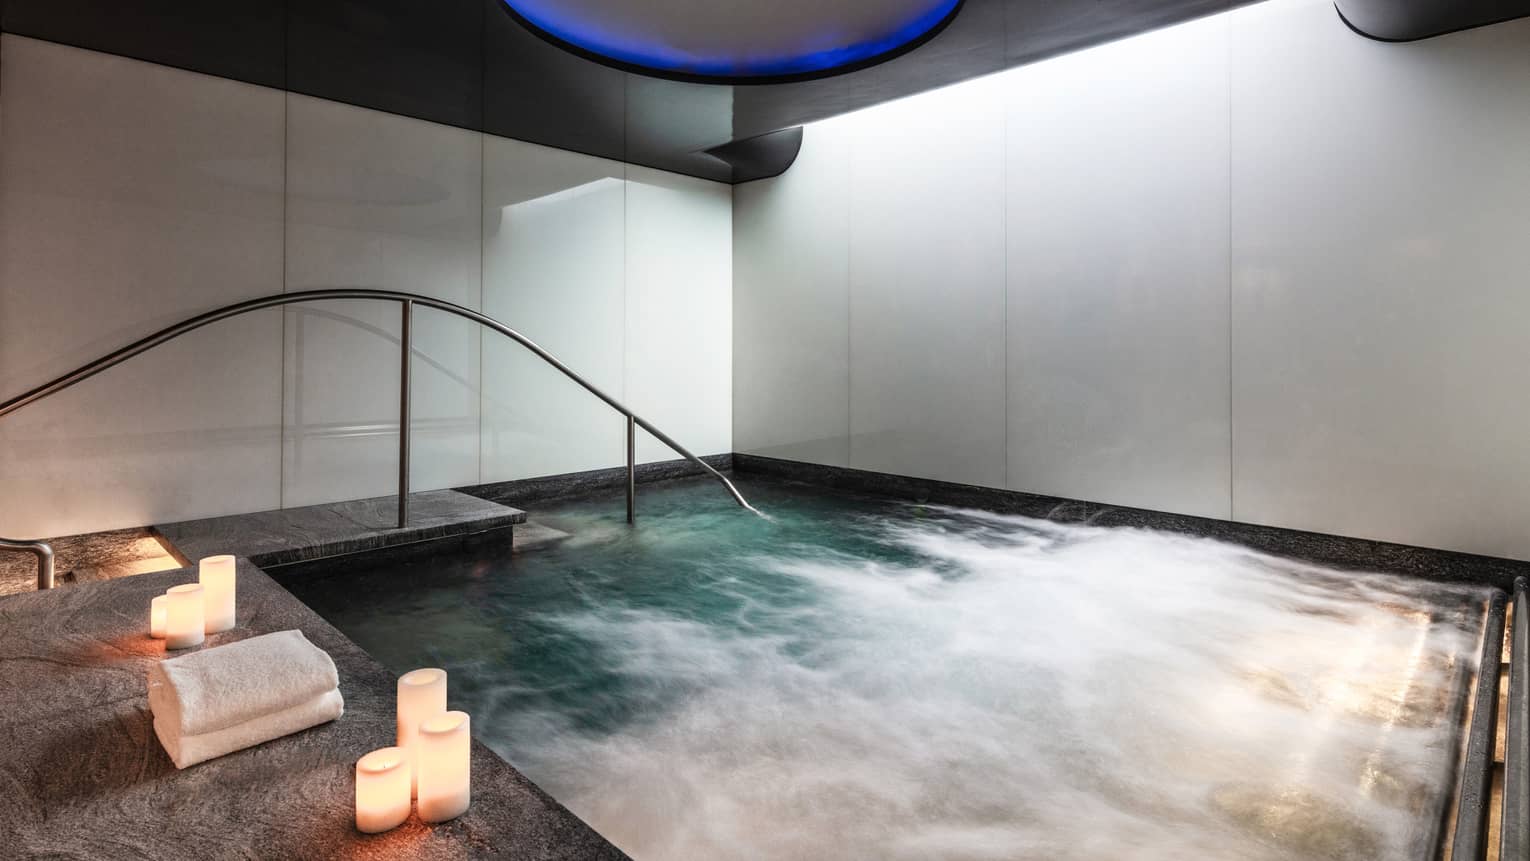 An indoor whirlpool with candle on the ledge.